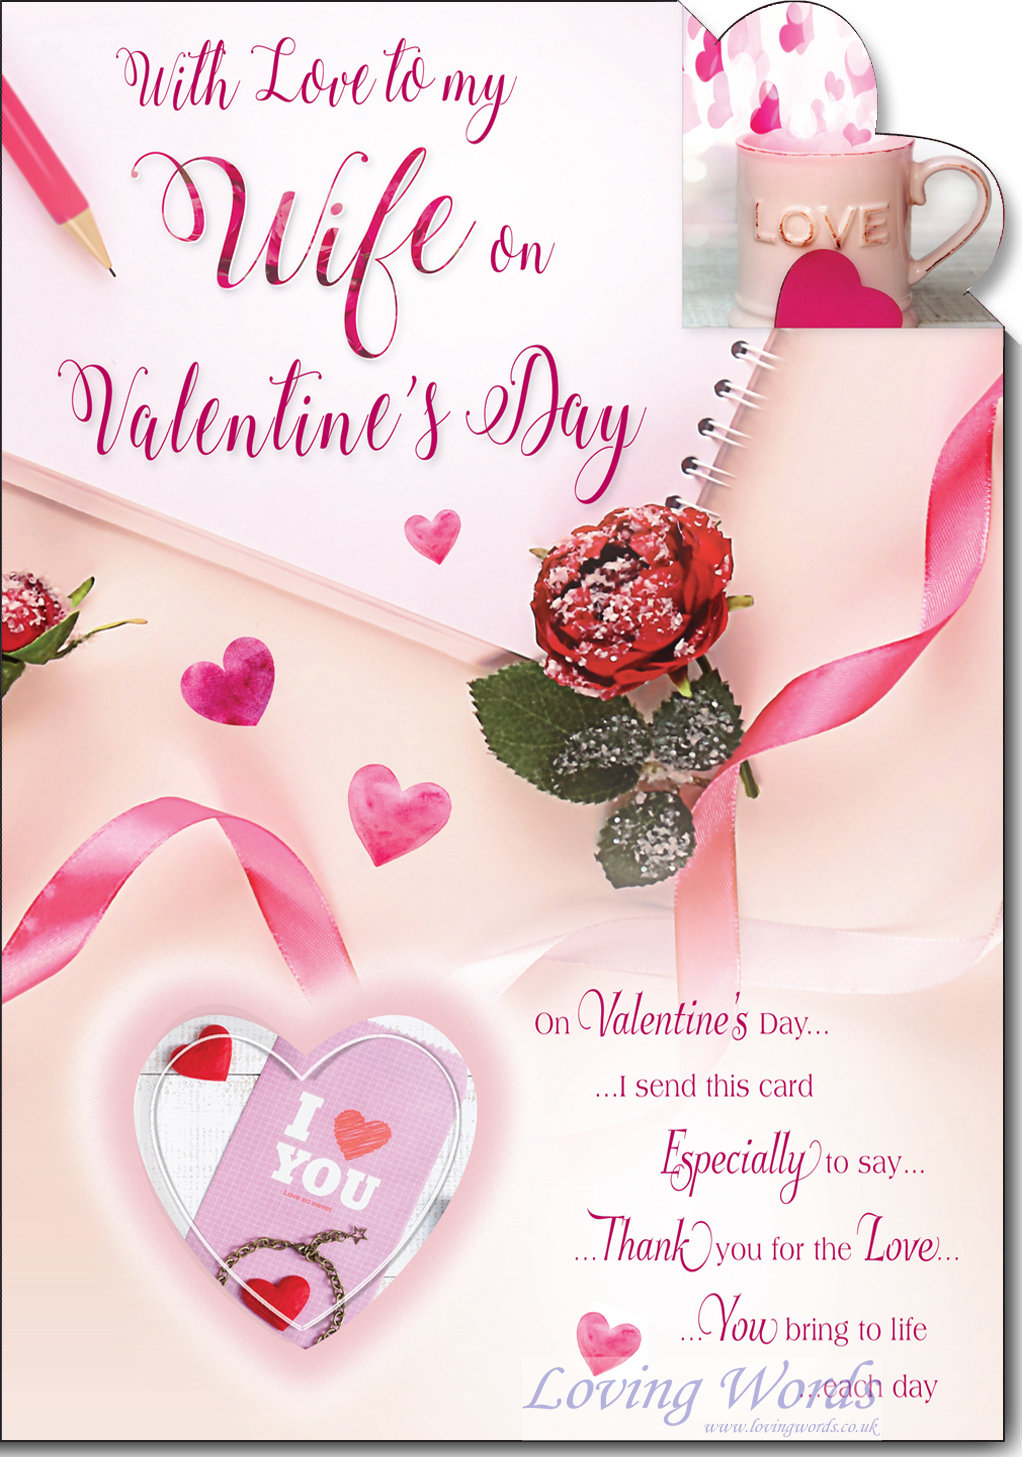 With Love To My Wife On Valentine s Day Greeting Cards By Loving Words